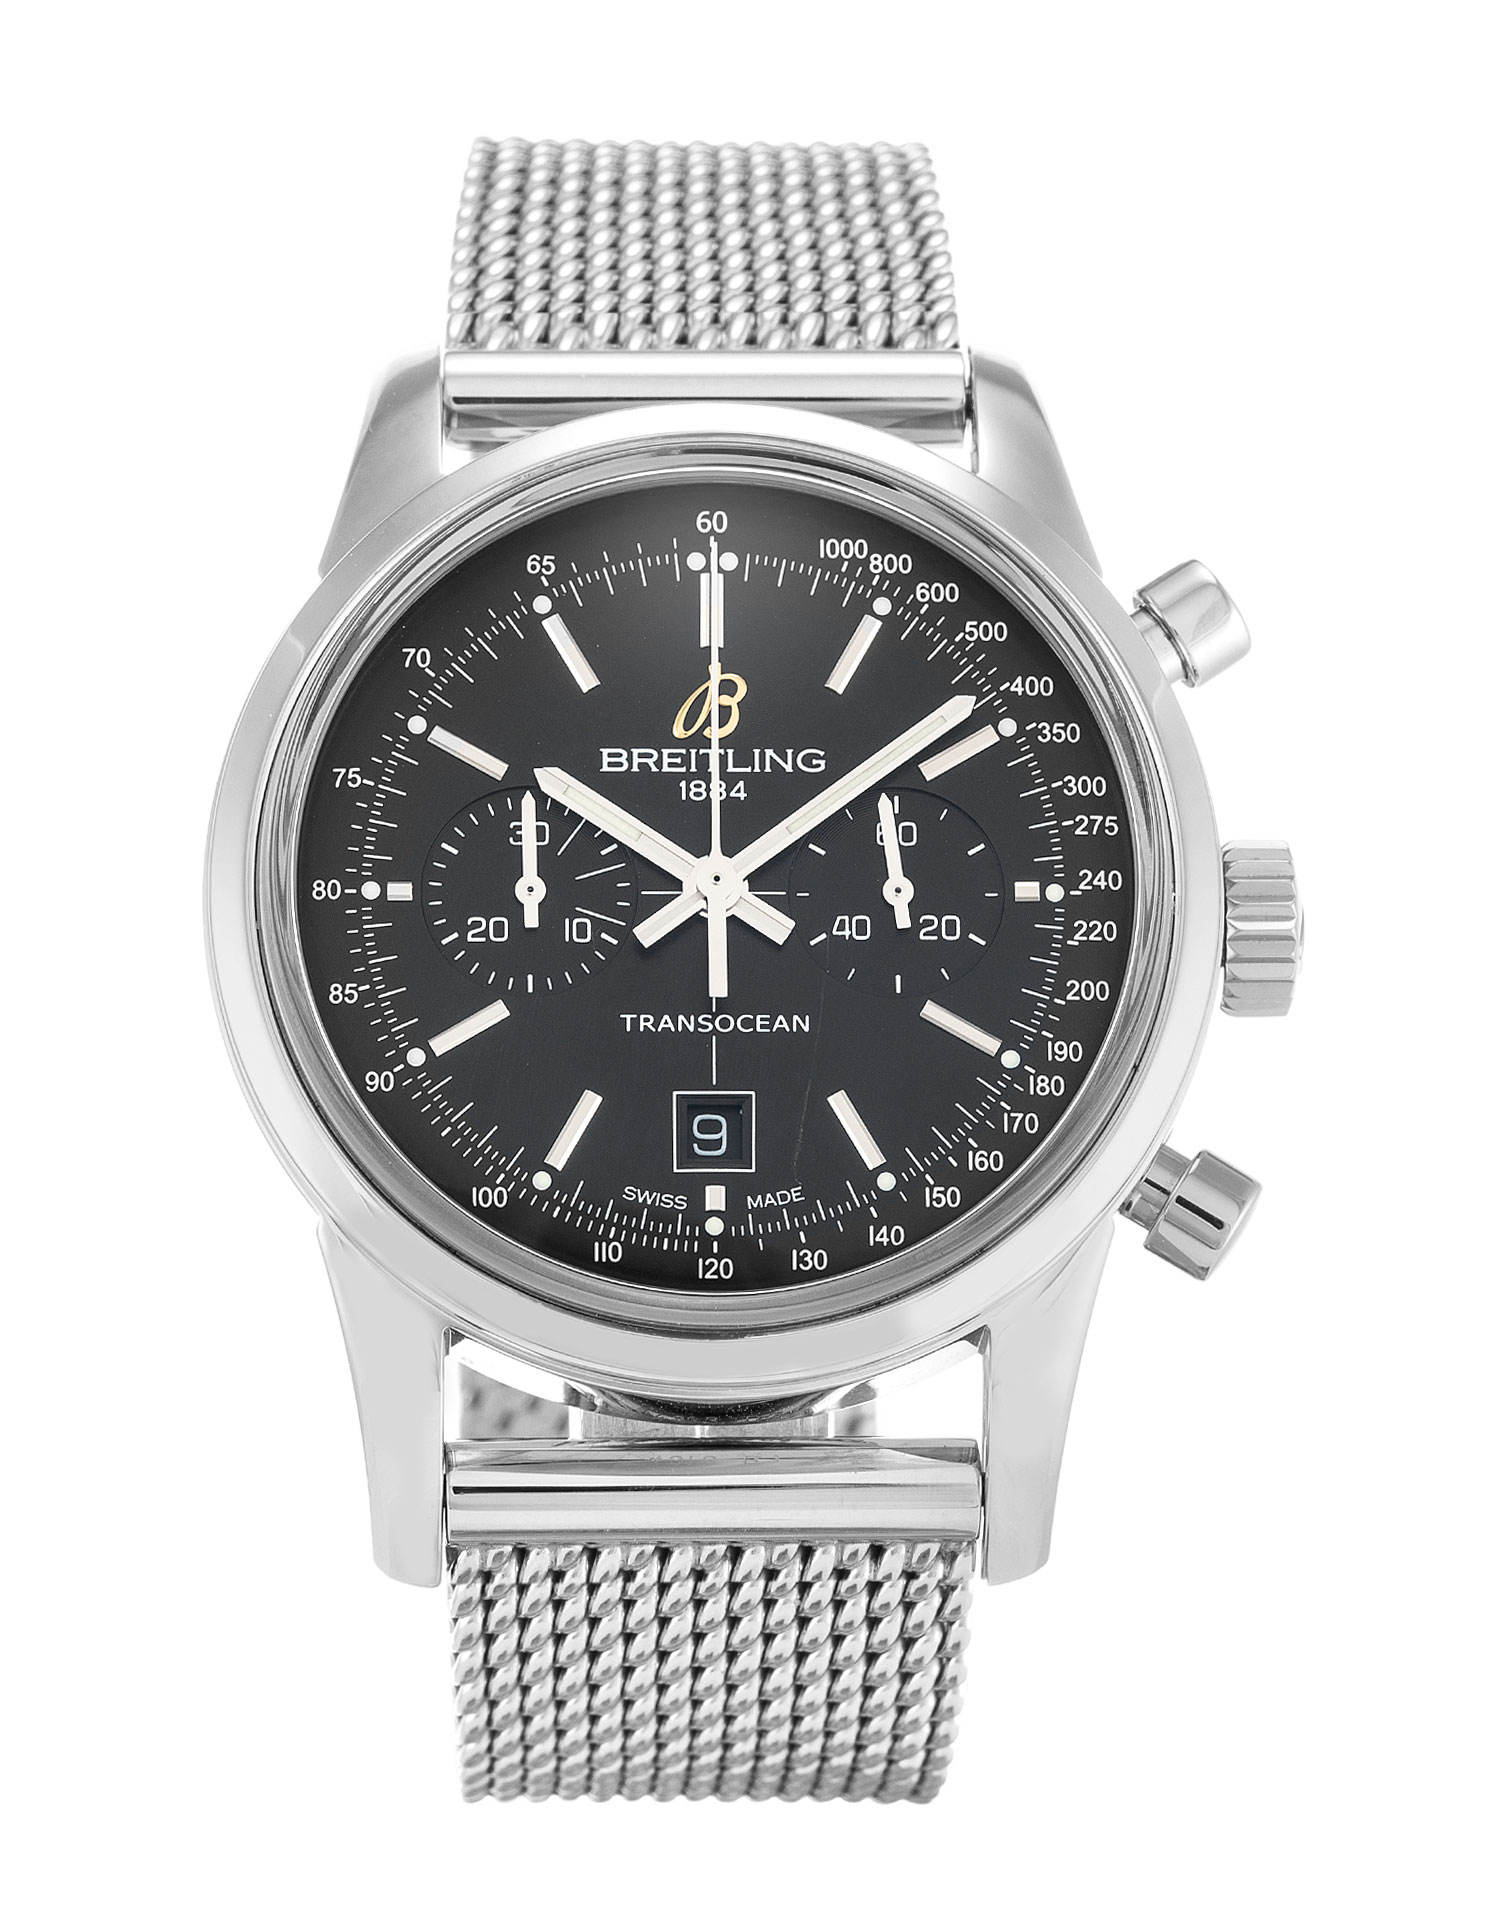 Breitling Transocean Chronograph 38 Stainless Steel Black Dial